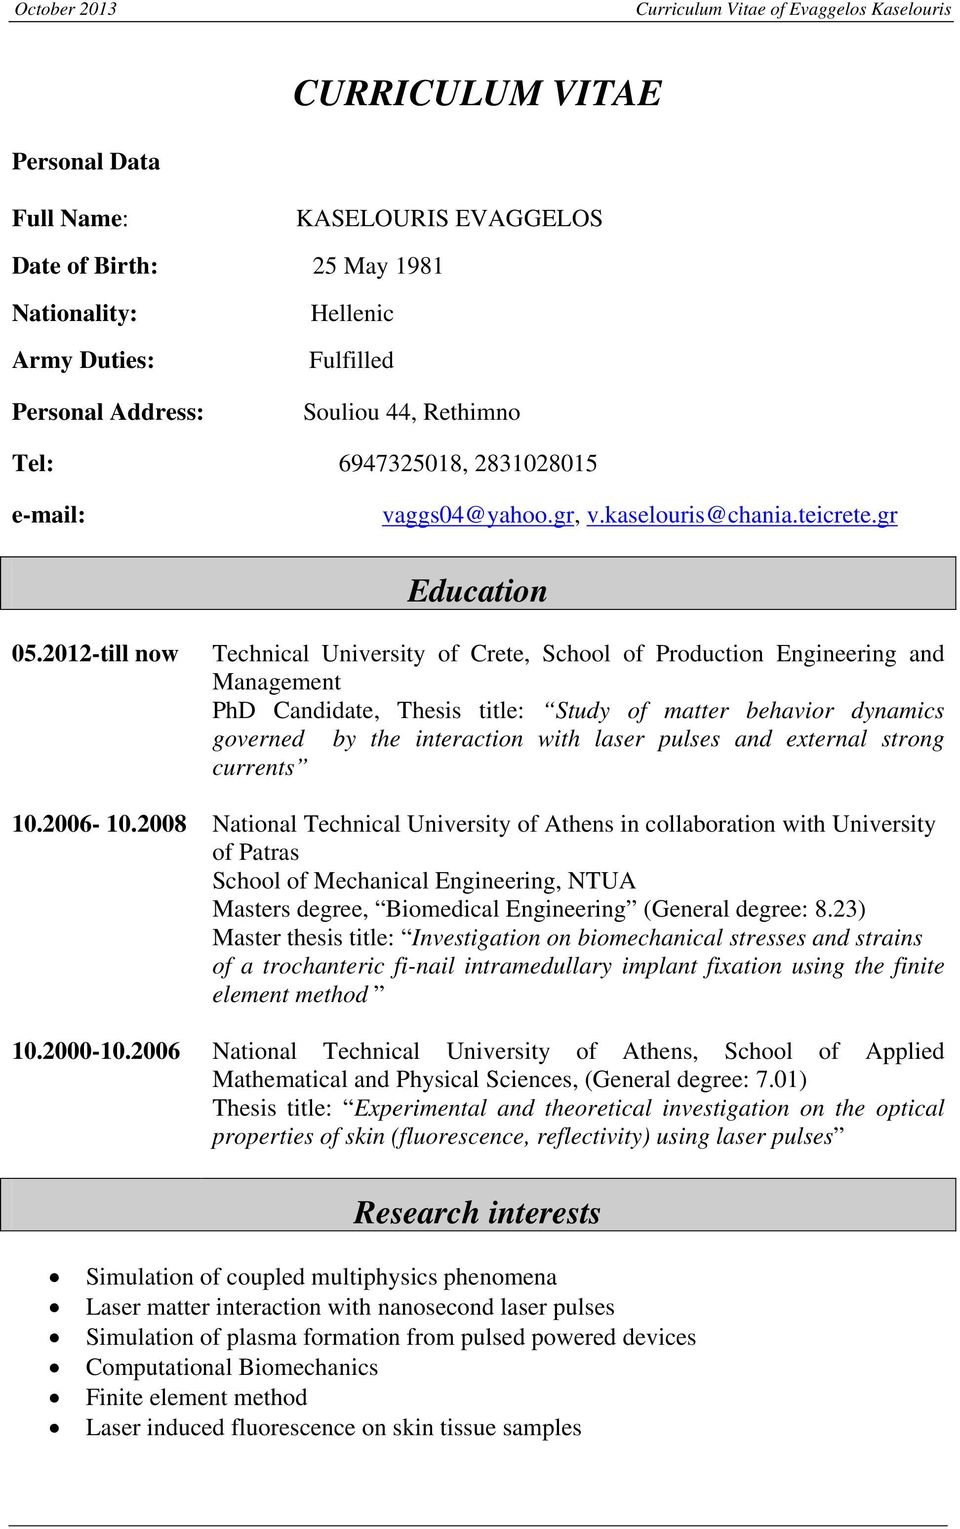 2012-till now Technical University of Crete, School of Production Engineering and Management PhD Candidate, Thesis title: Study of matter behavior dynamics governed by the interaction with laser